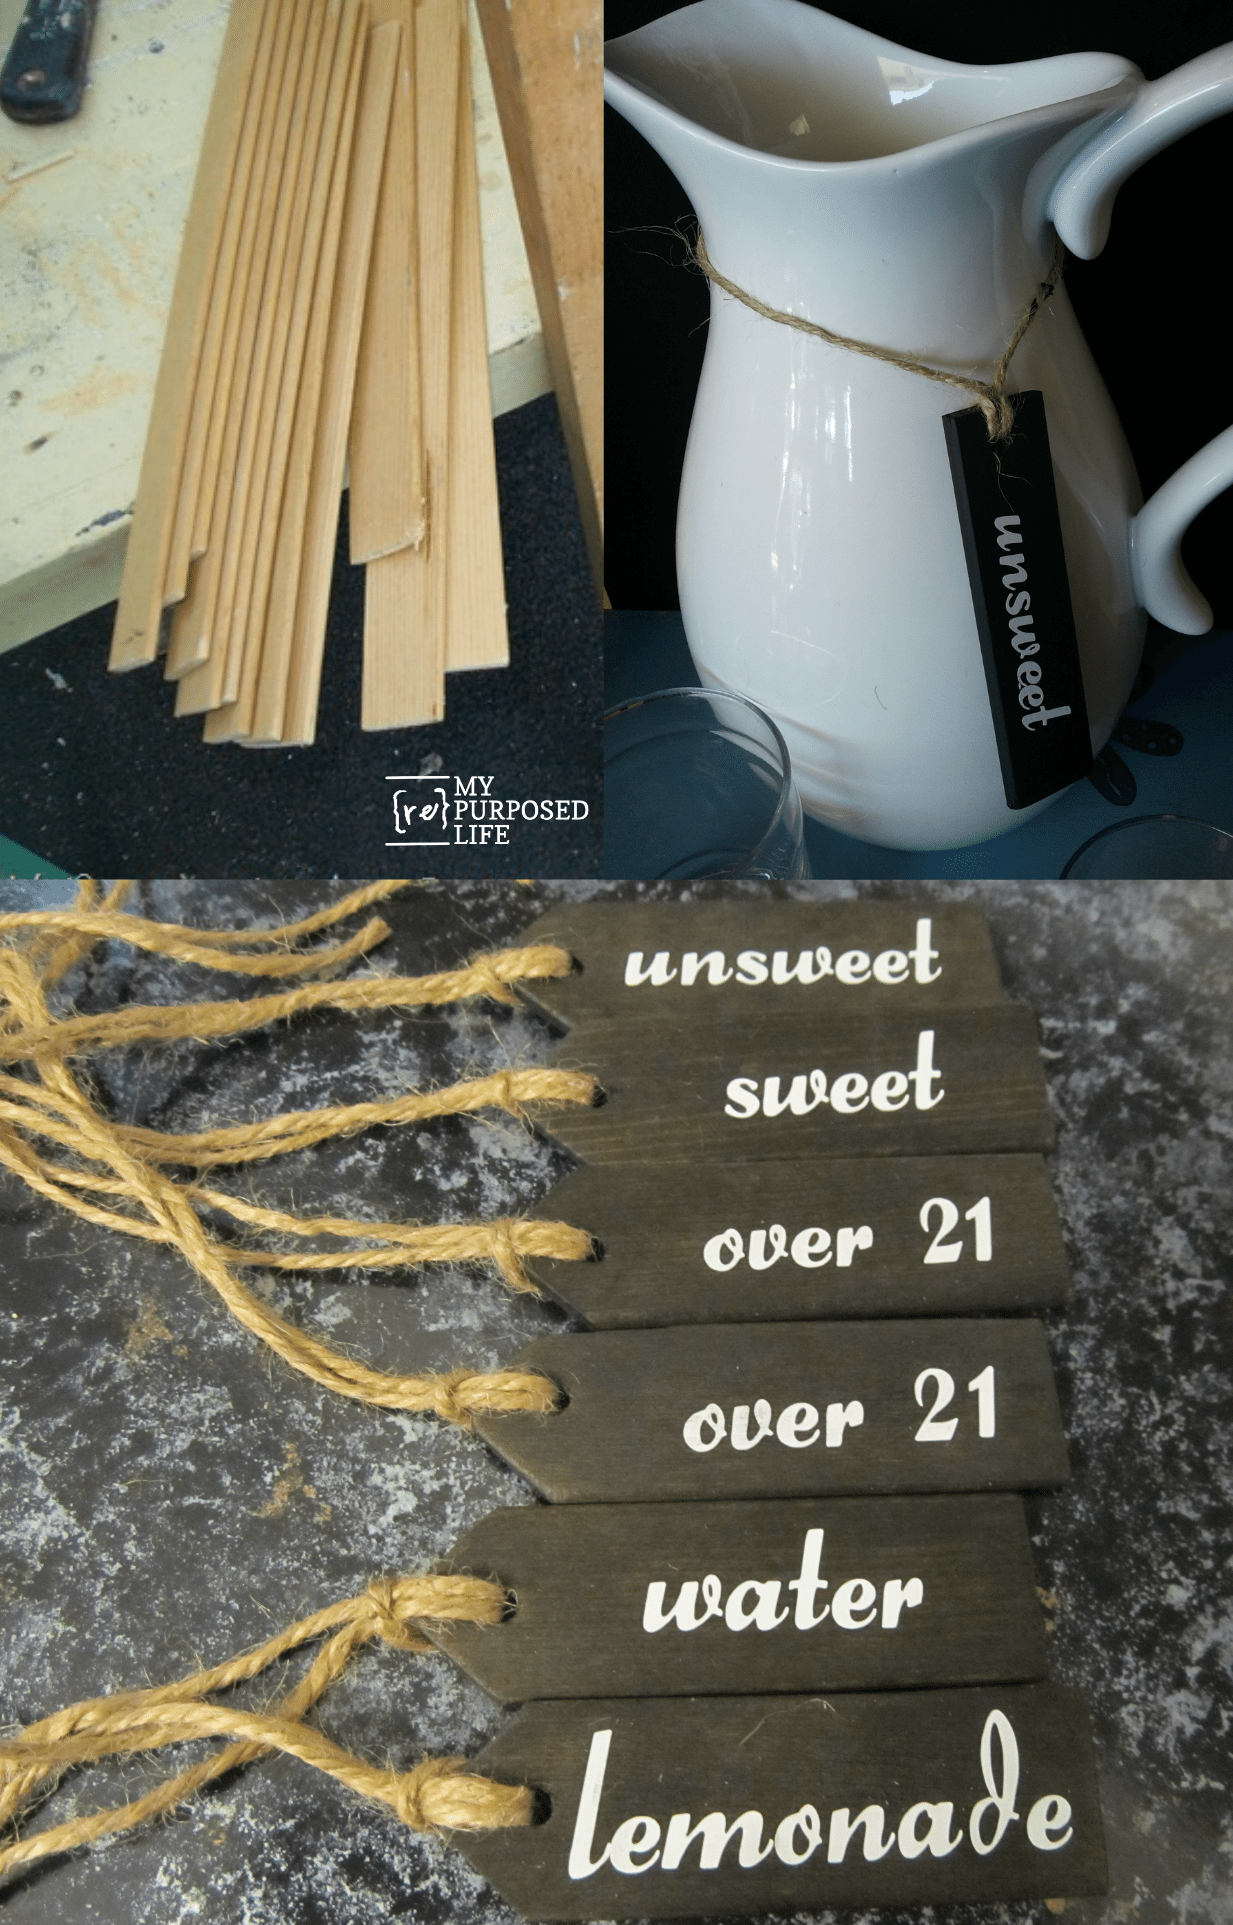 How to make wooden beverage tags out of repurposed shutter slats. Add some chalkboard paint or vinyl stencils to change them up and make them versatile. #MyRepurposedLife #Repurposed #shutter #slats #beverage #tags #easy #chalkboard via @repurposedlife